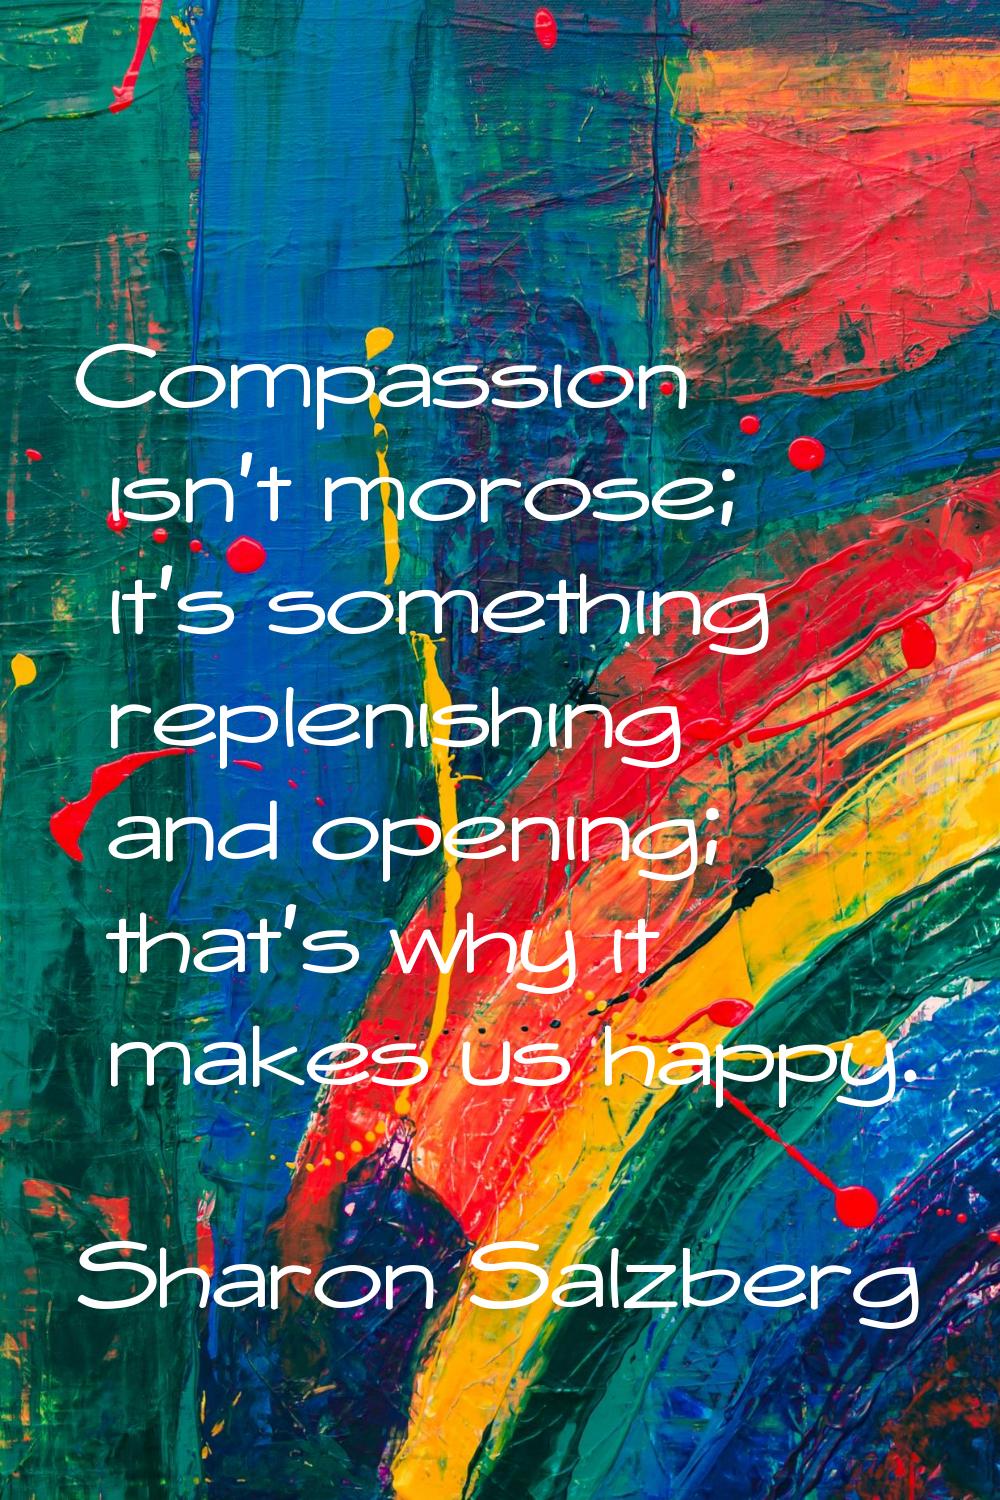 Compassion isn't morose; it's something replenishing and opening; that's why it makes us happy.